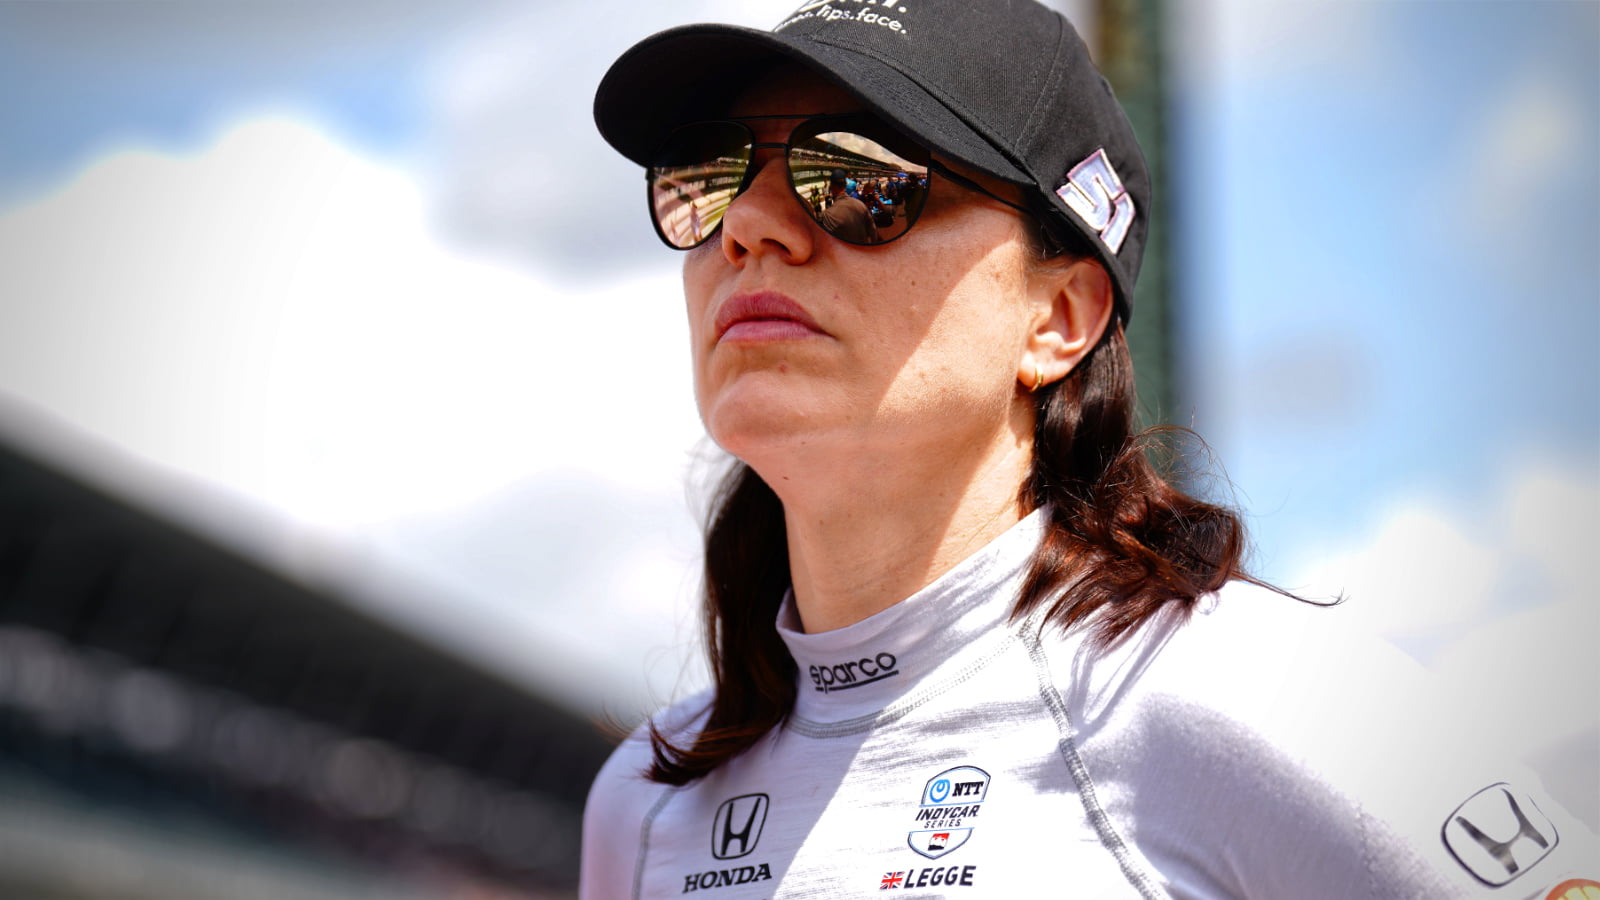 Breaking News: Katherine Legge to Make Exciting Return to IndyCar in Double-Header at Iowa Speedway